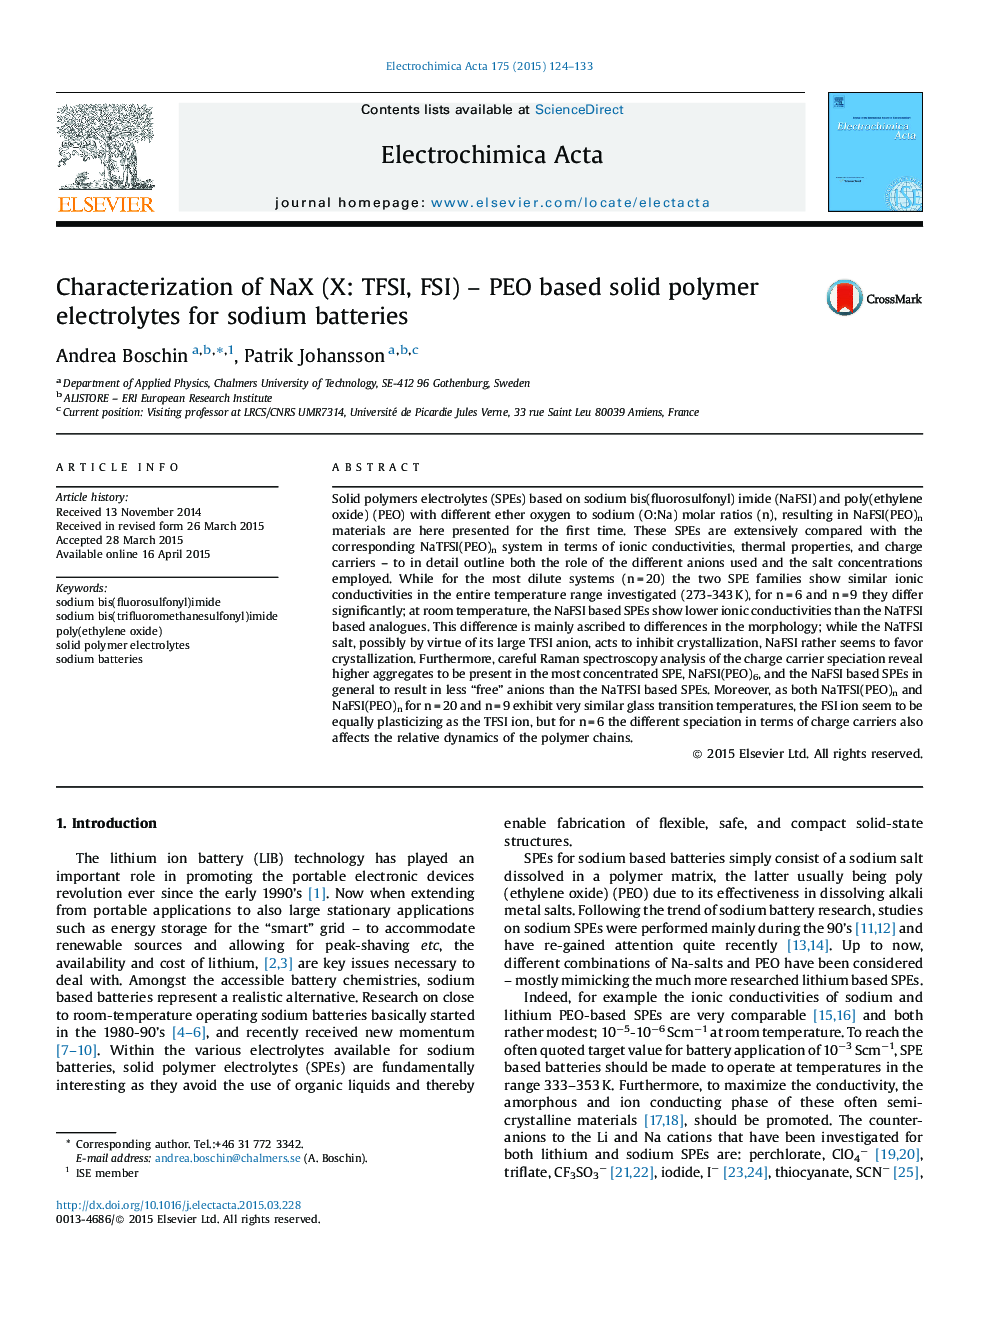 Characterization of NaX (X: TFSI, FSI) – PEO based solid polymer electrolytes for sodium batteries